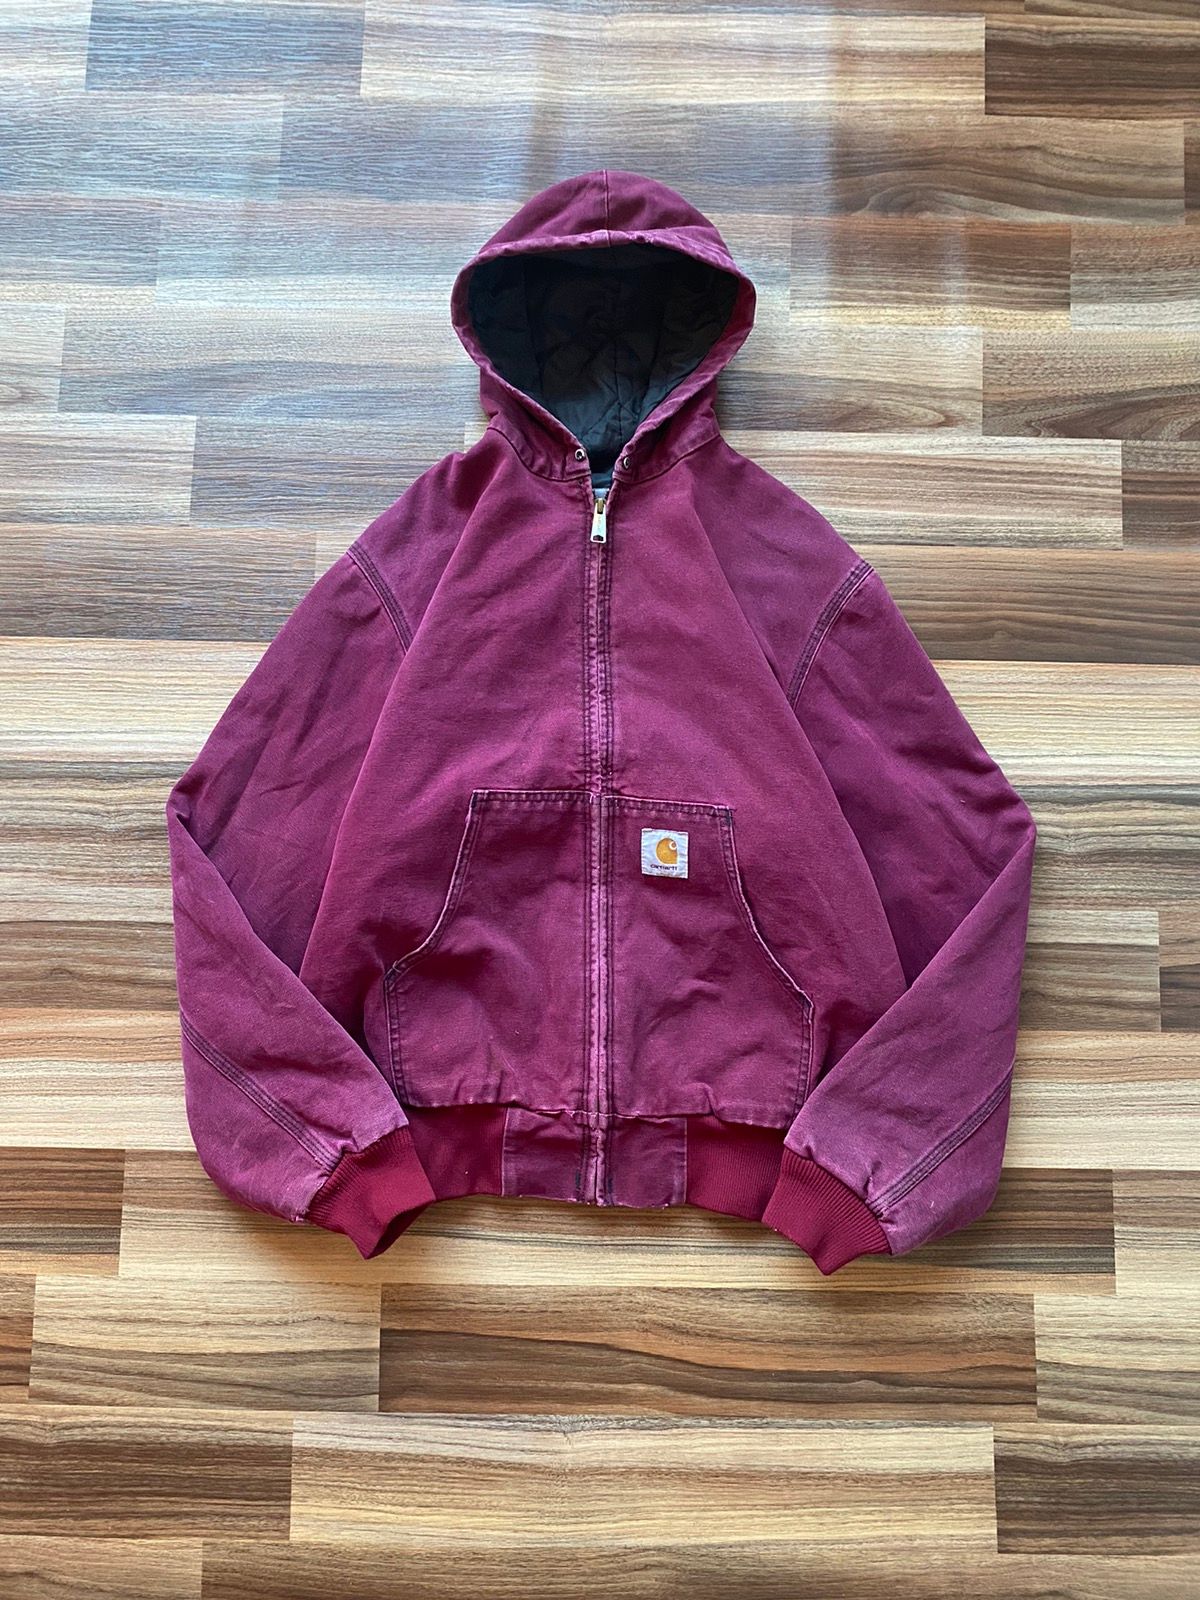 Pre-owned Carhartt X Vintage Carhartt Active Jacket 90's Red Wine